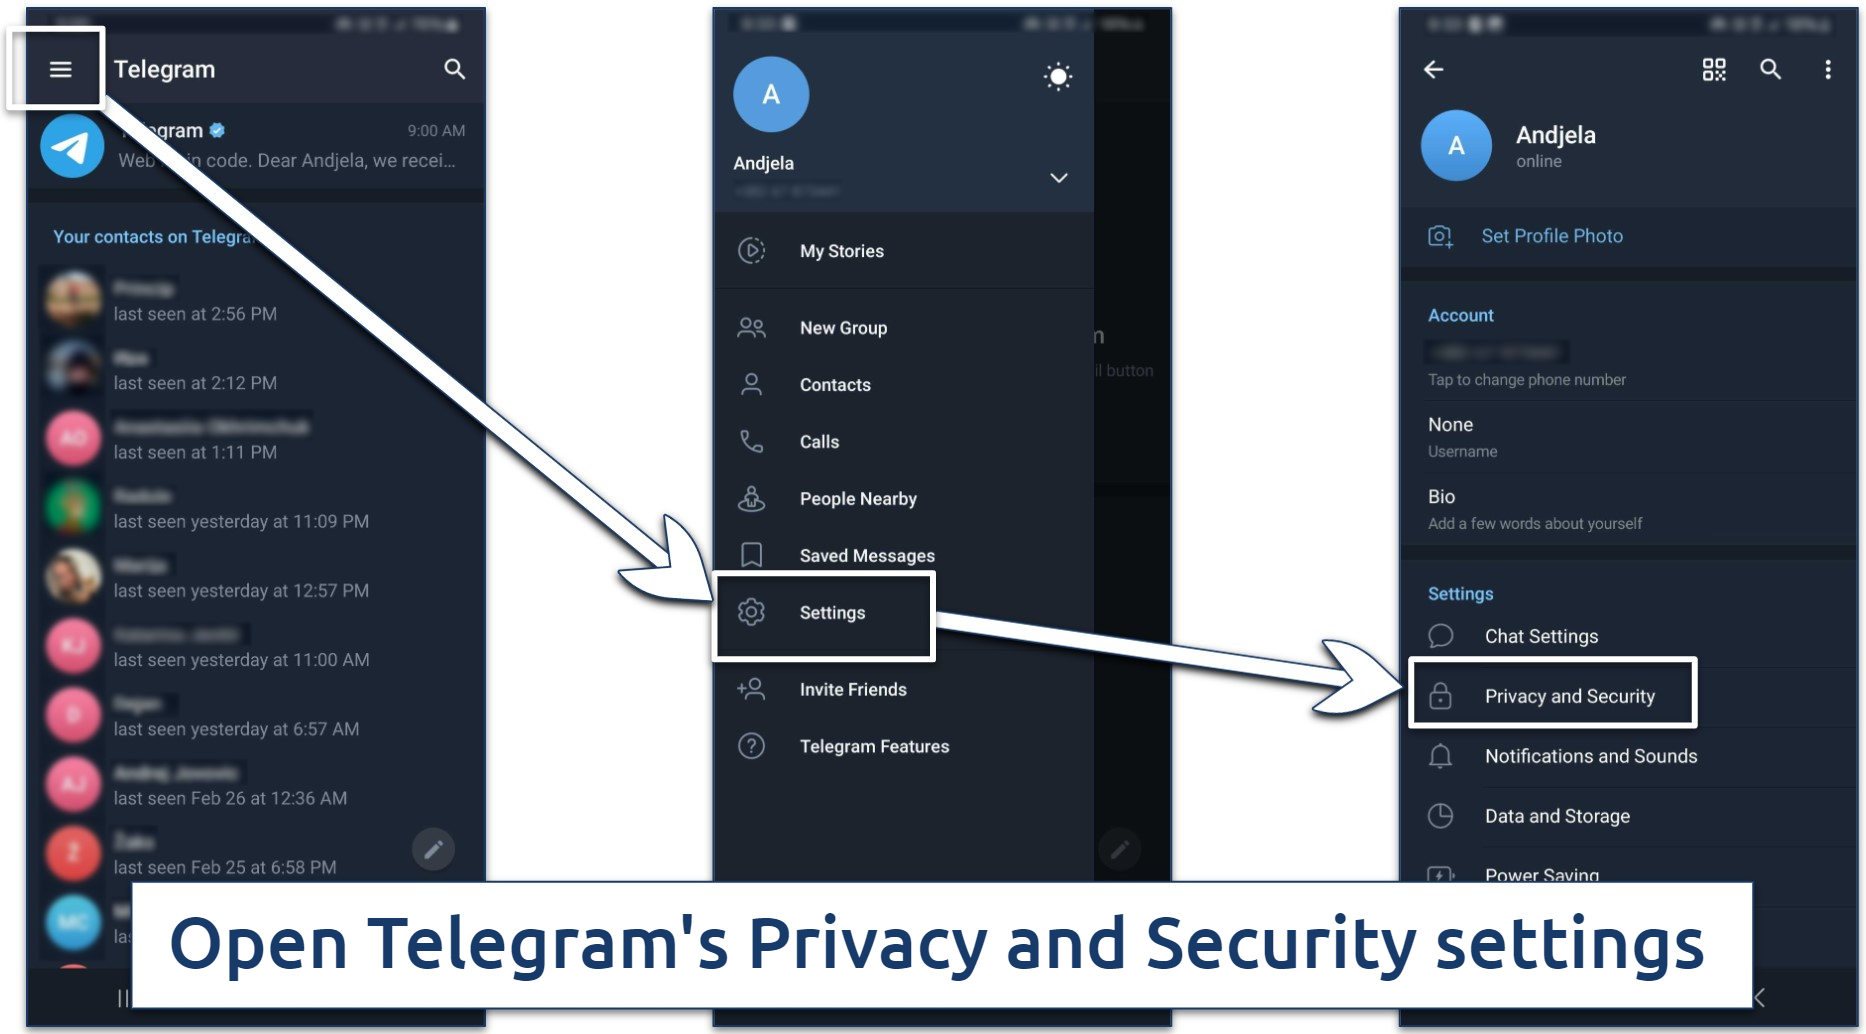 Instructions on how to find Telegram's Privacy and Security settings on Android